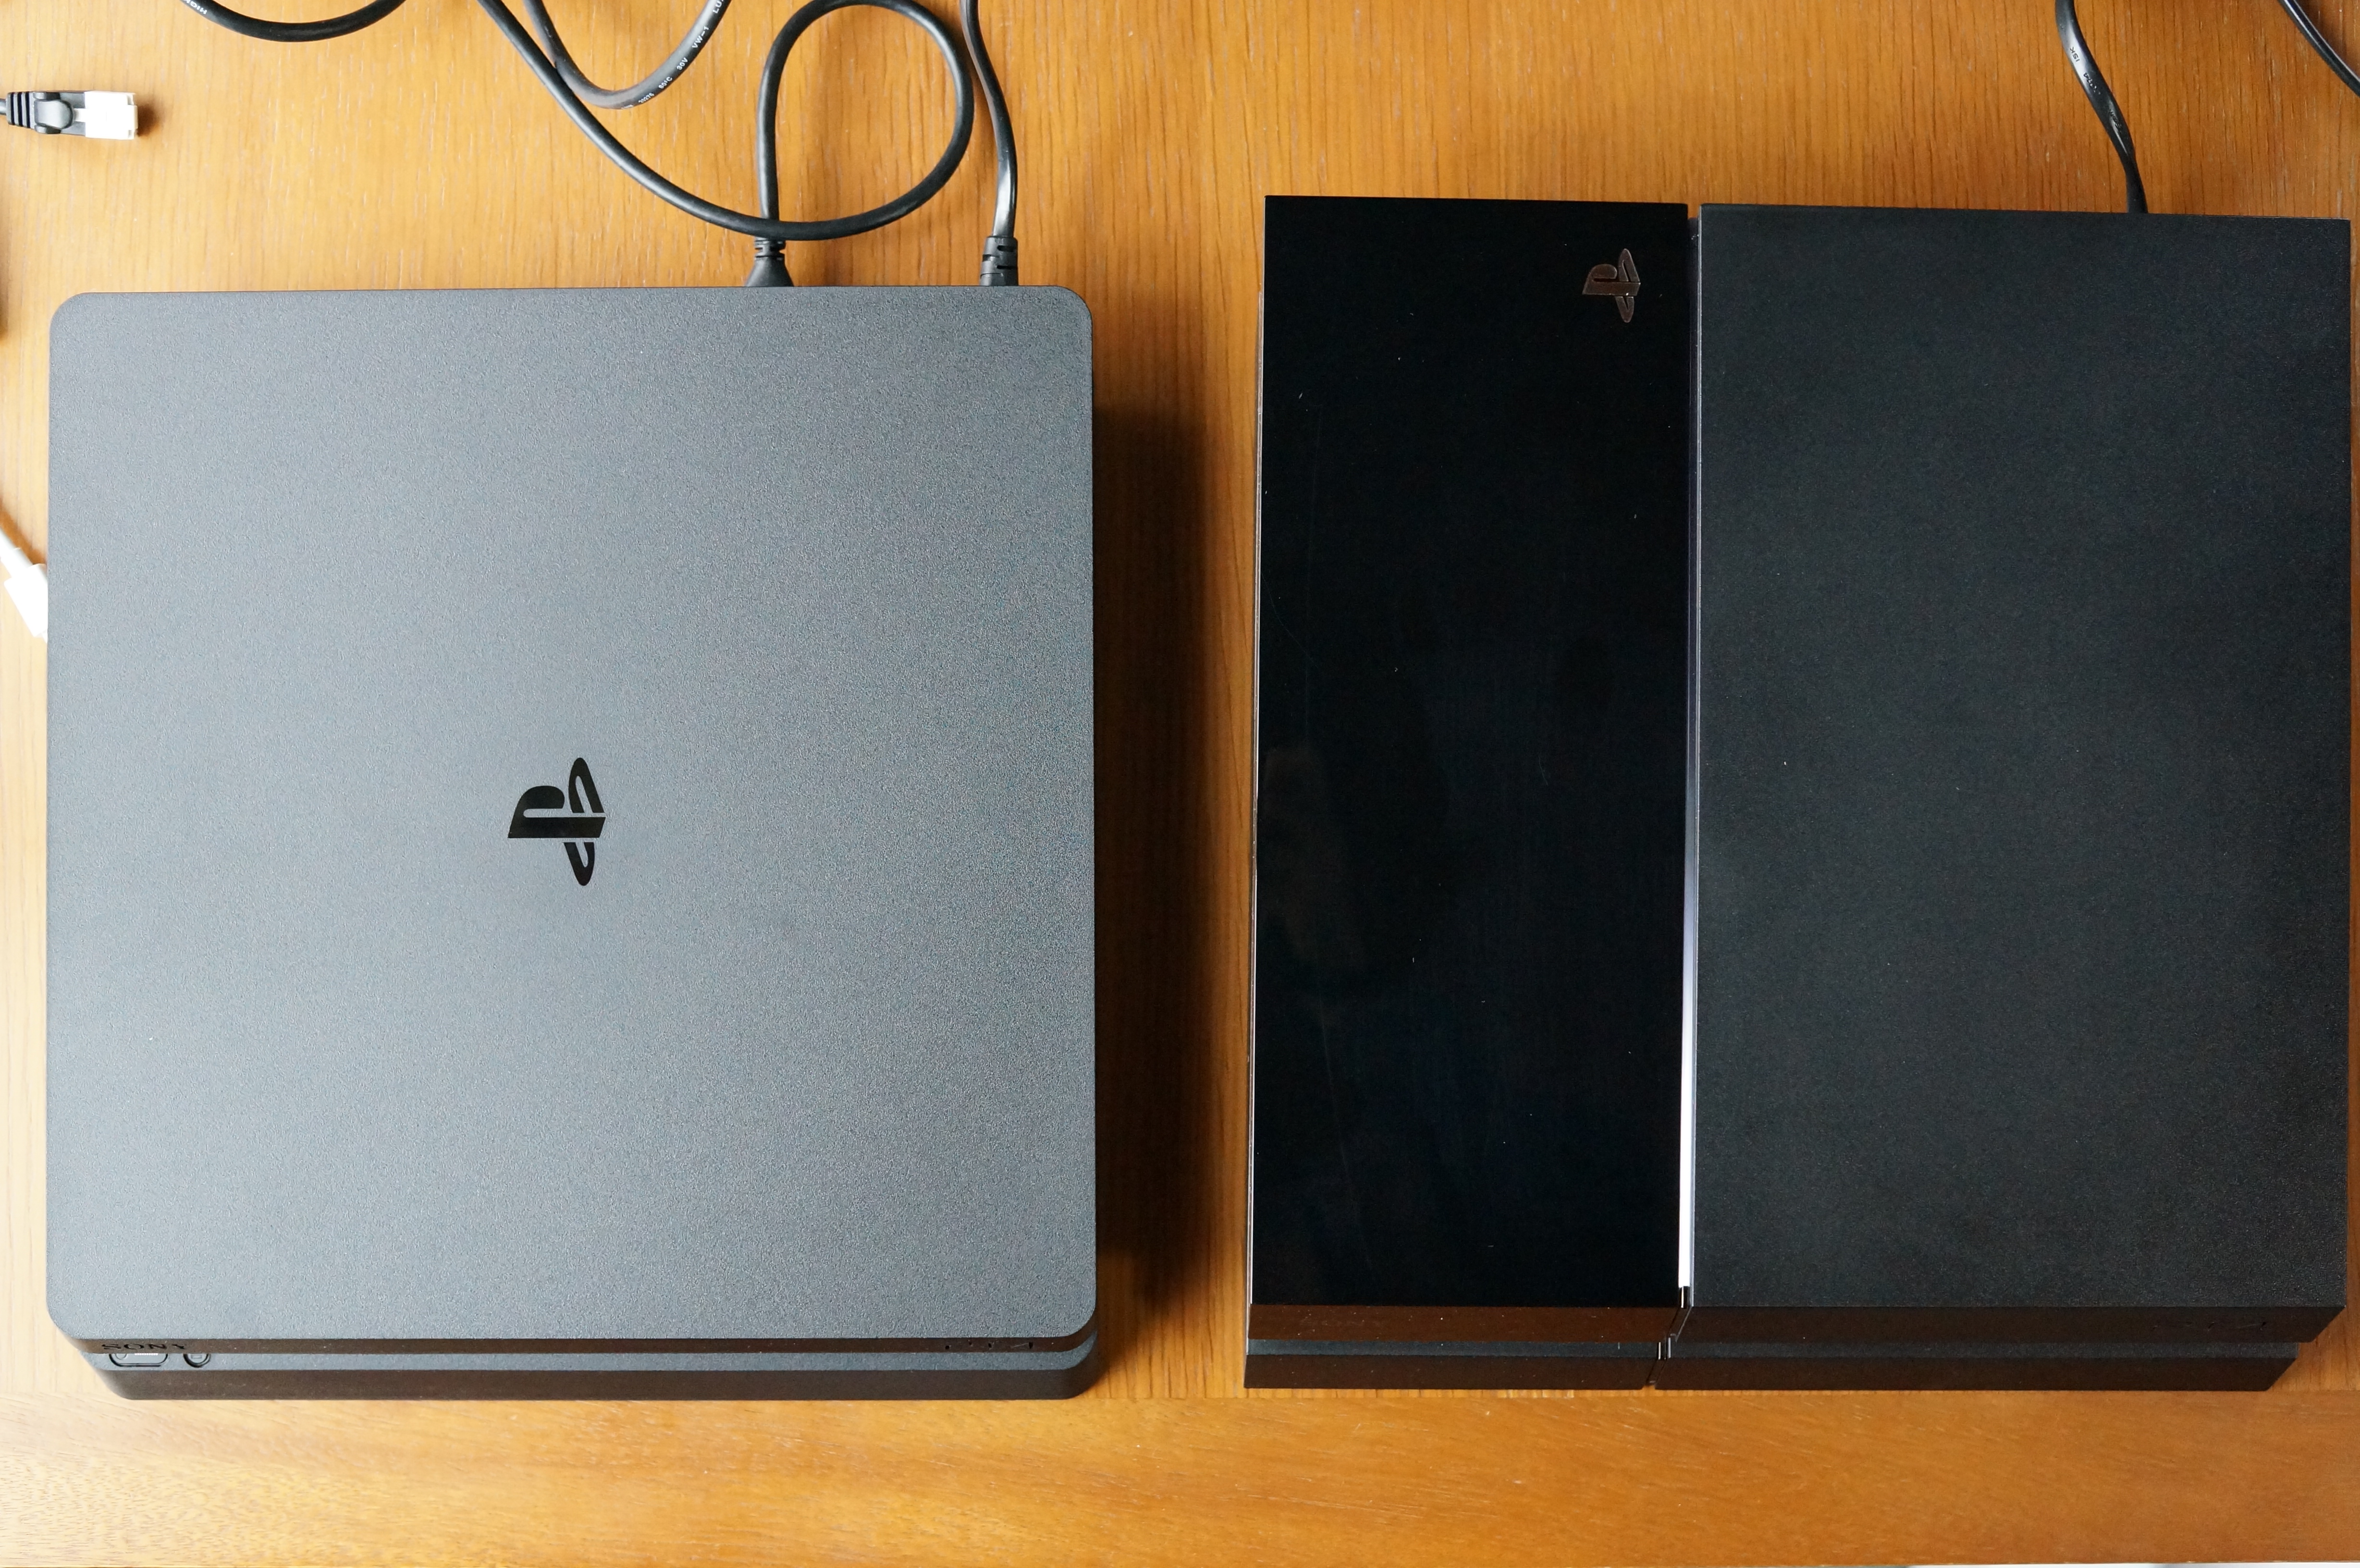 PS4が壊れたら、PS4 Slimを買おう。 | TOMMY NOTES